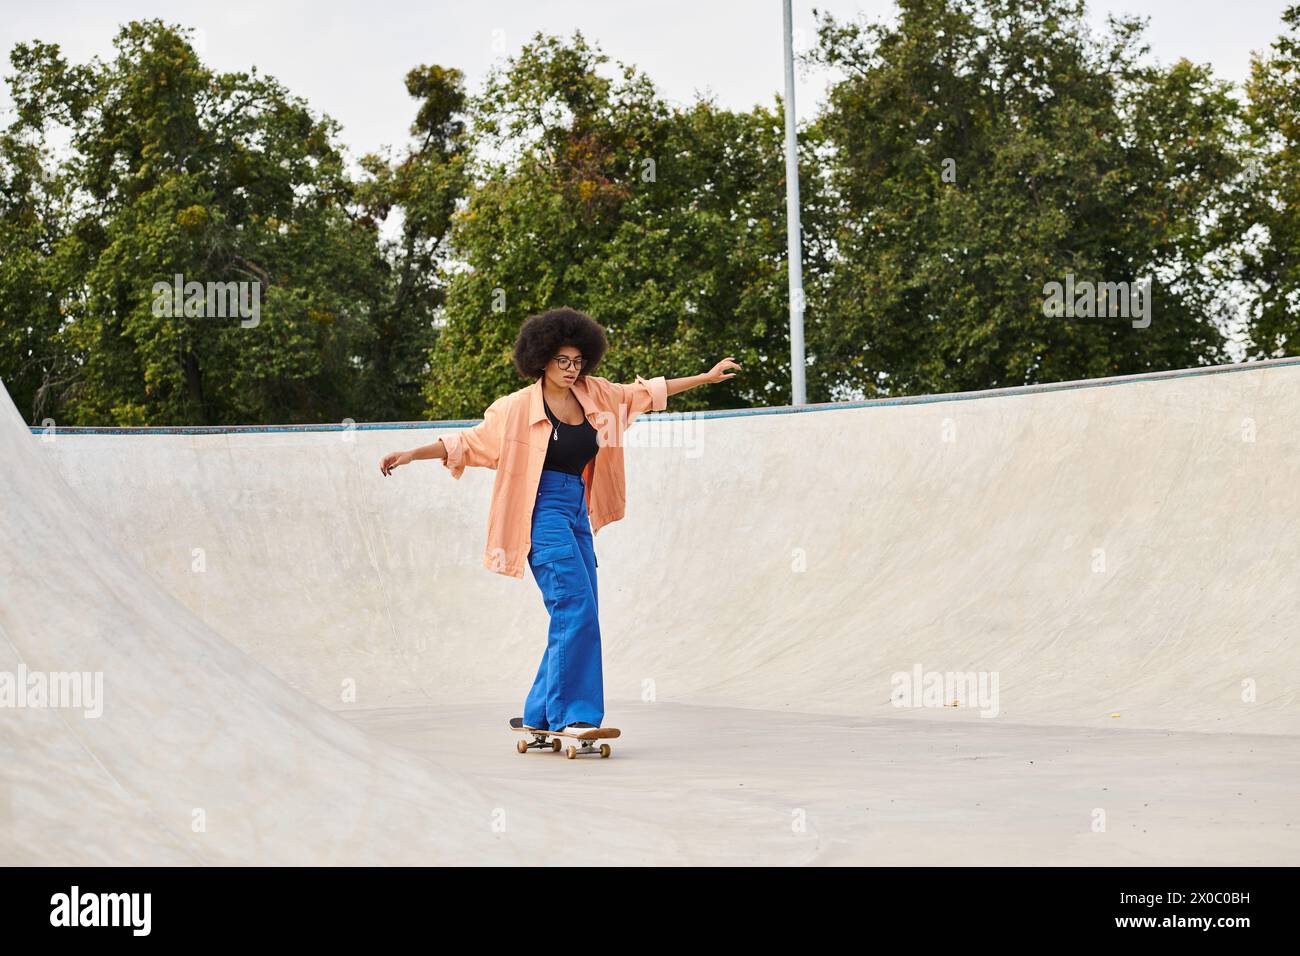 A young African American woman with curly hair confidently rides her skateboard up the side of a ramp in a skate park. Stock Photo